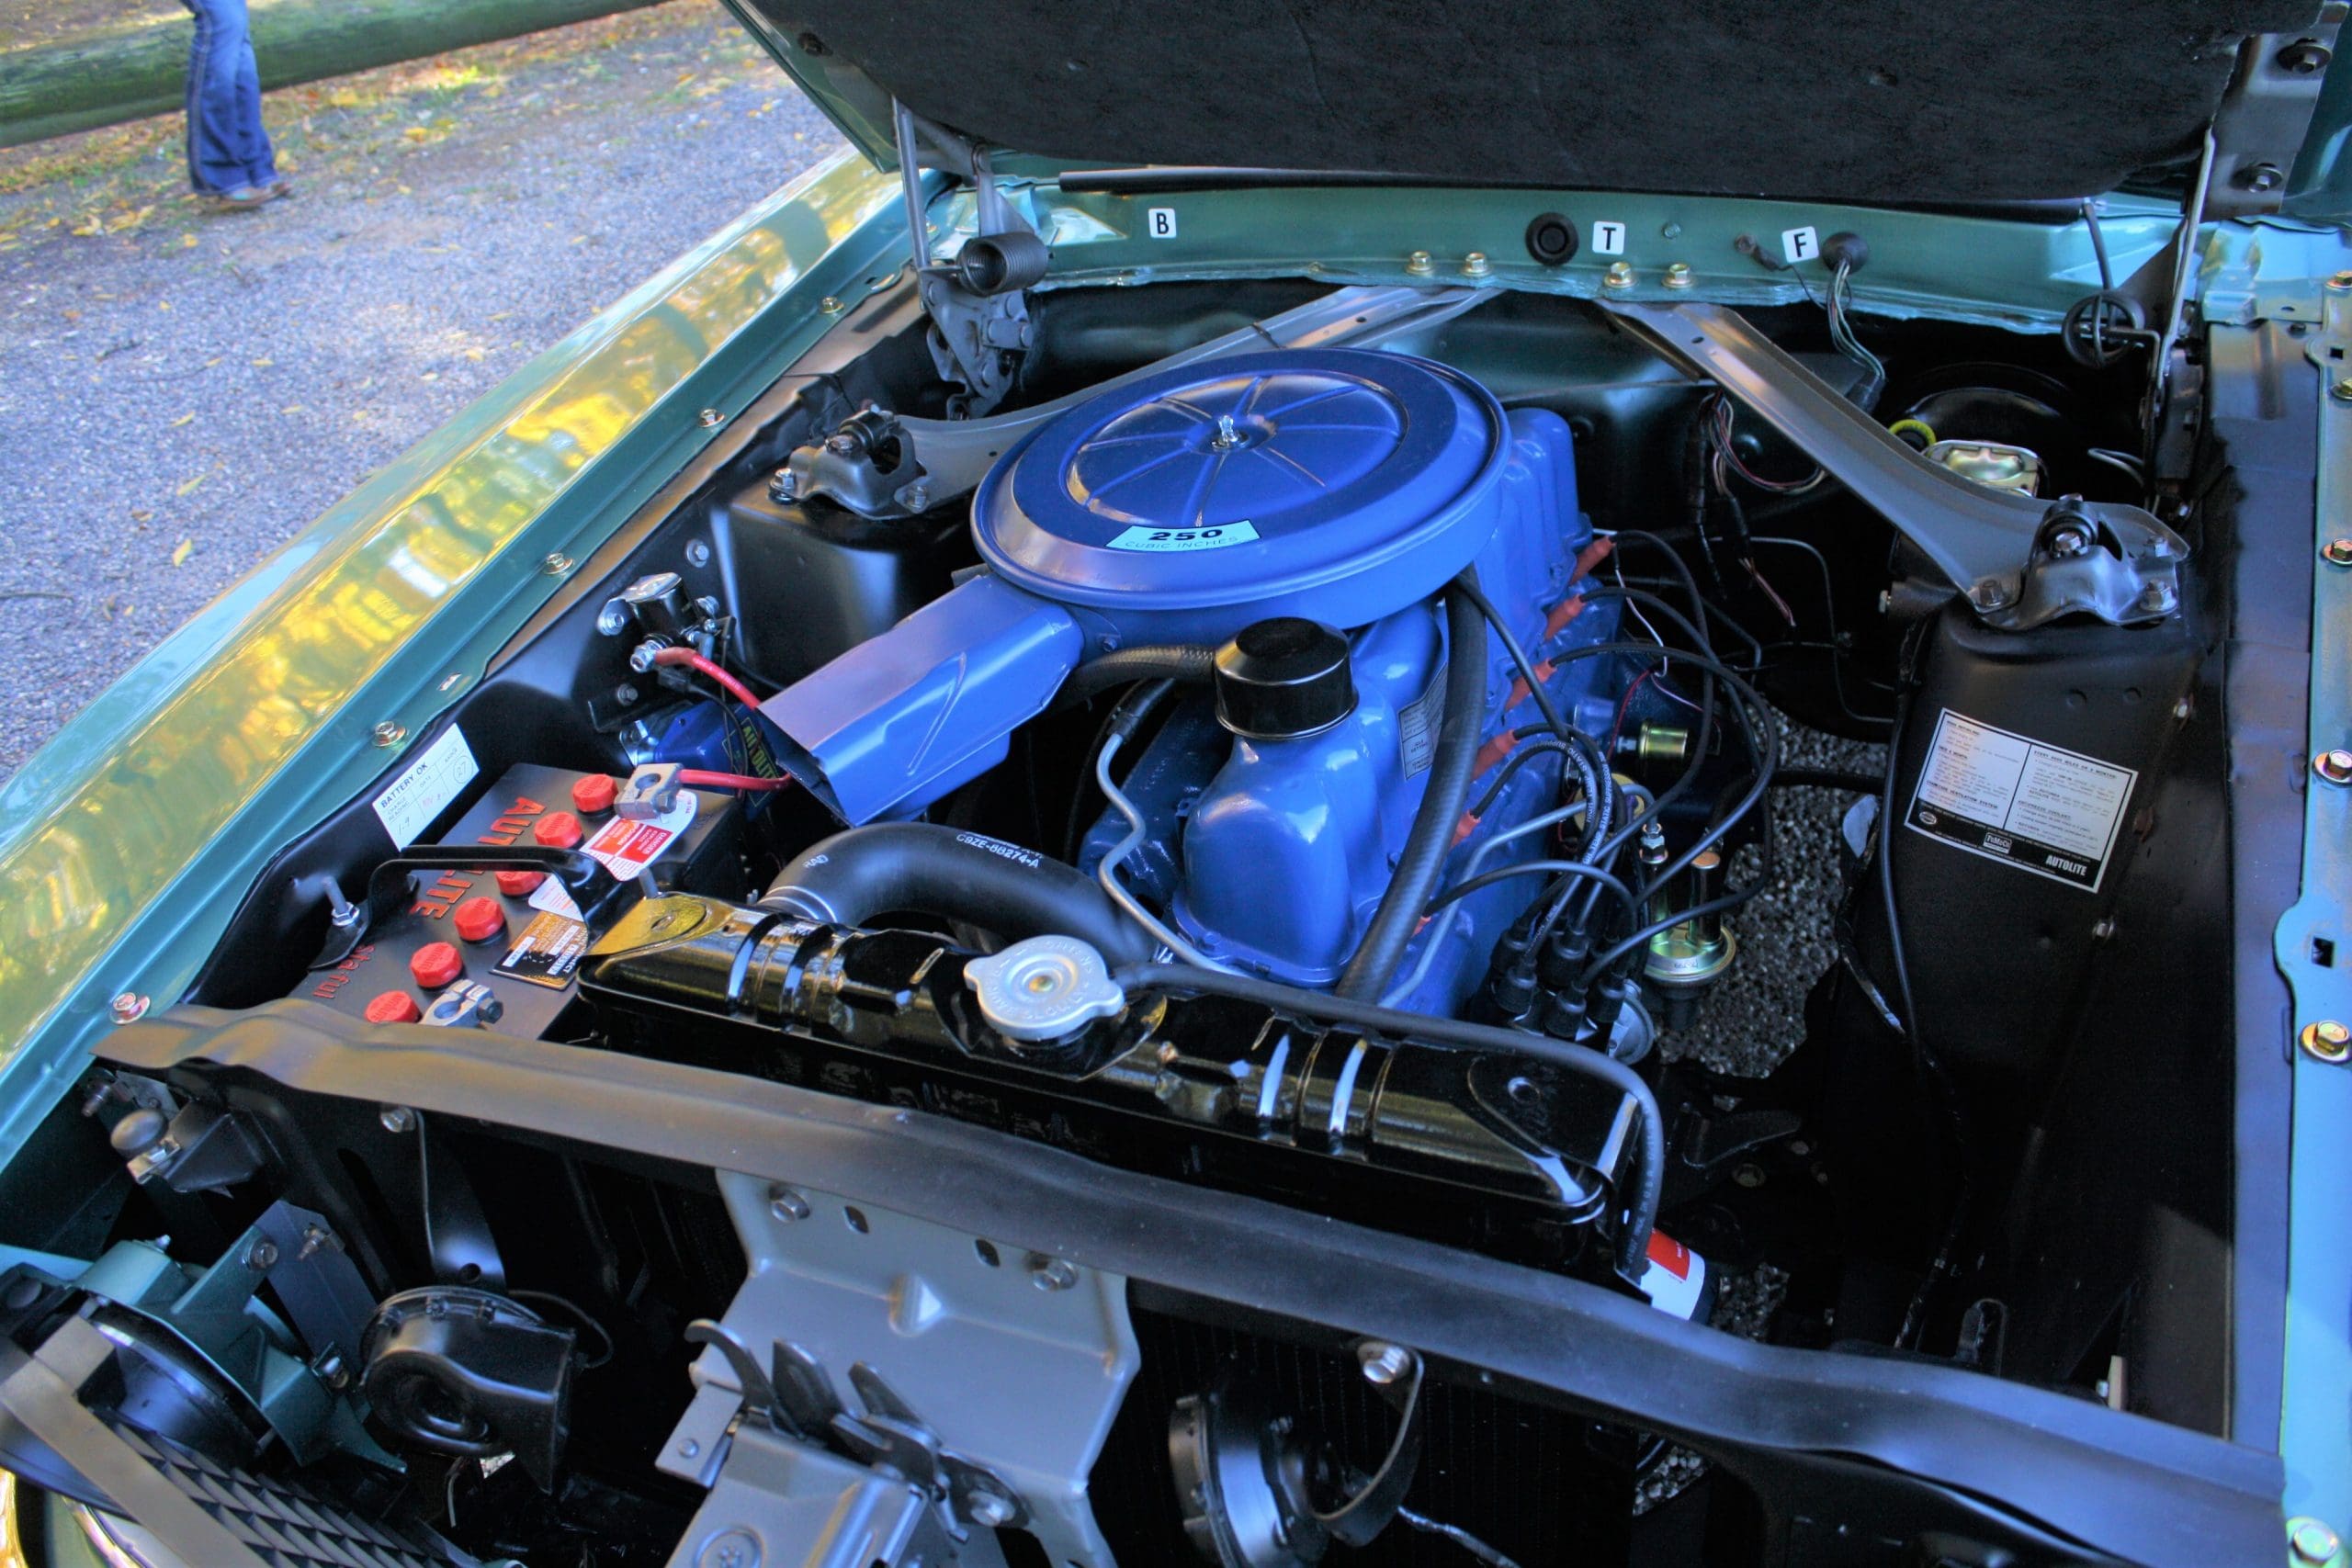 1969 Mustang Engine Information & Specs - 250 Cubic Inch Inline 6